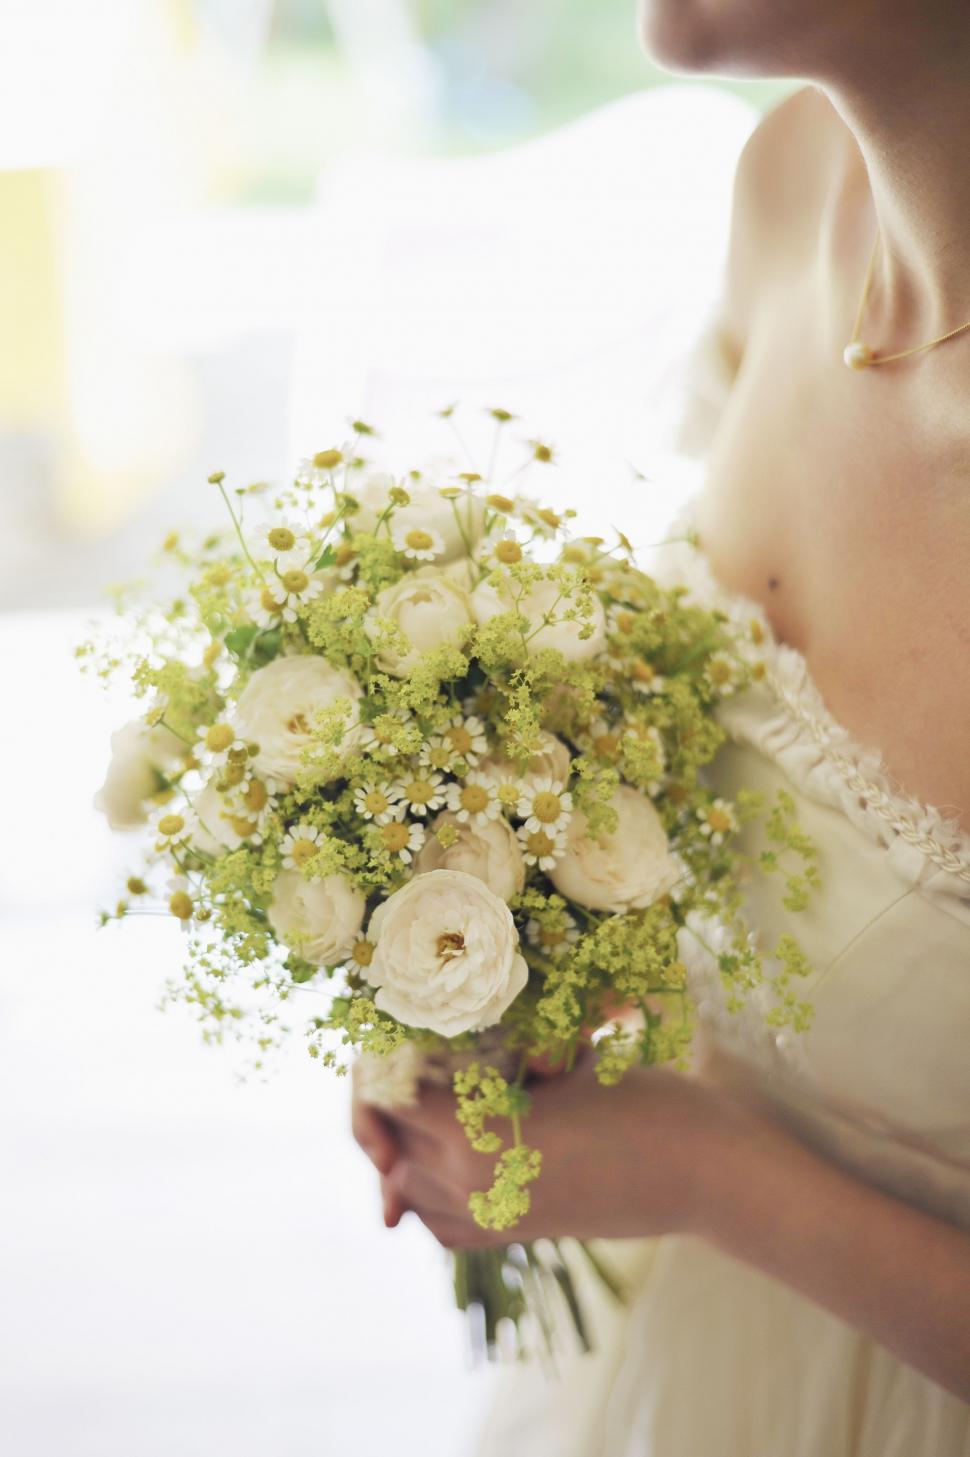 Free Image of Wedding bouquet in bridal hand  